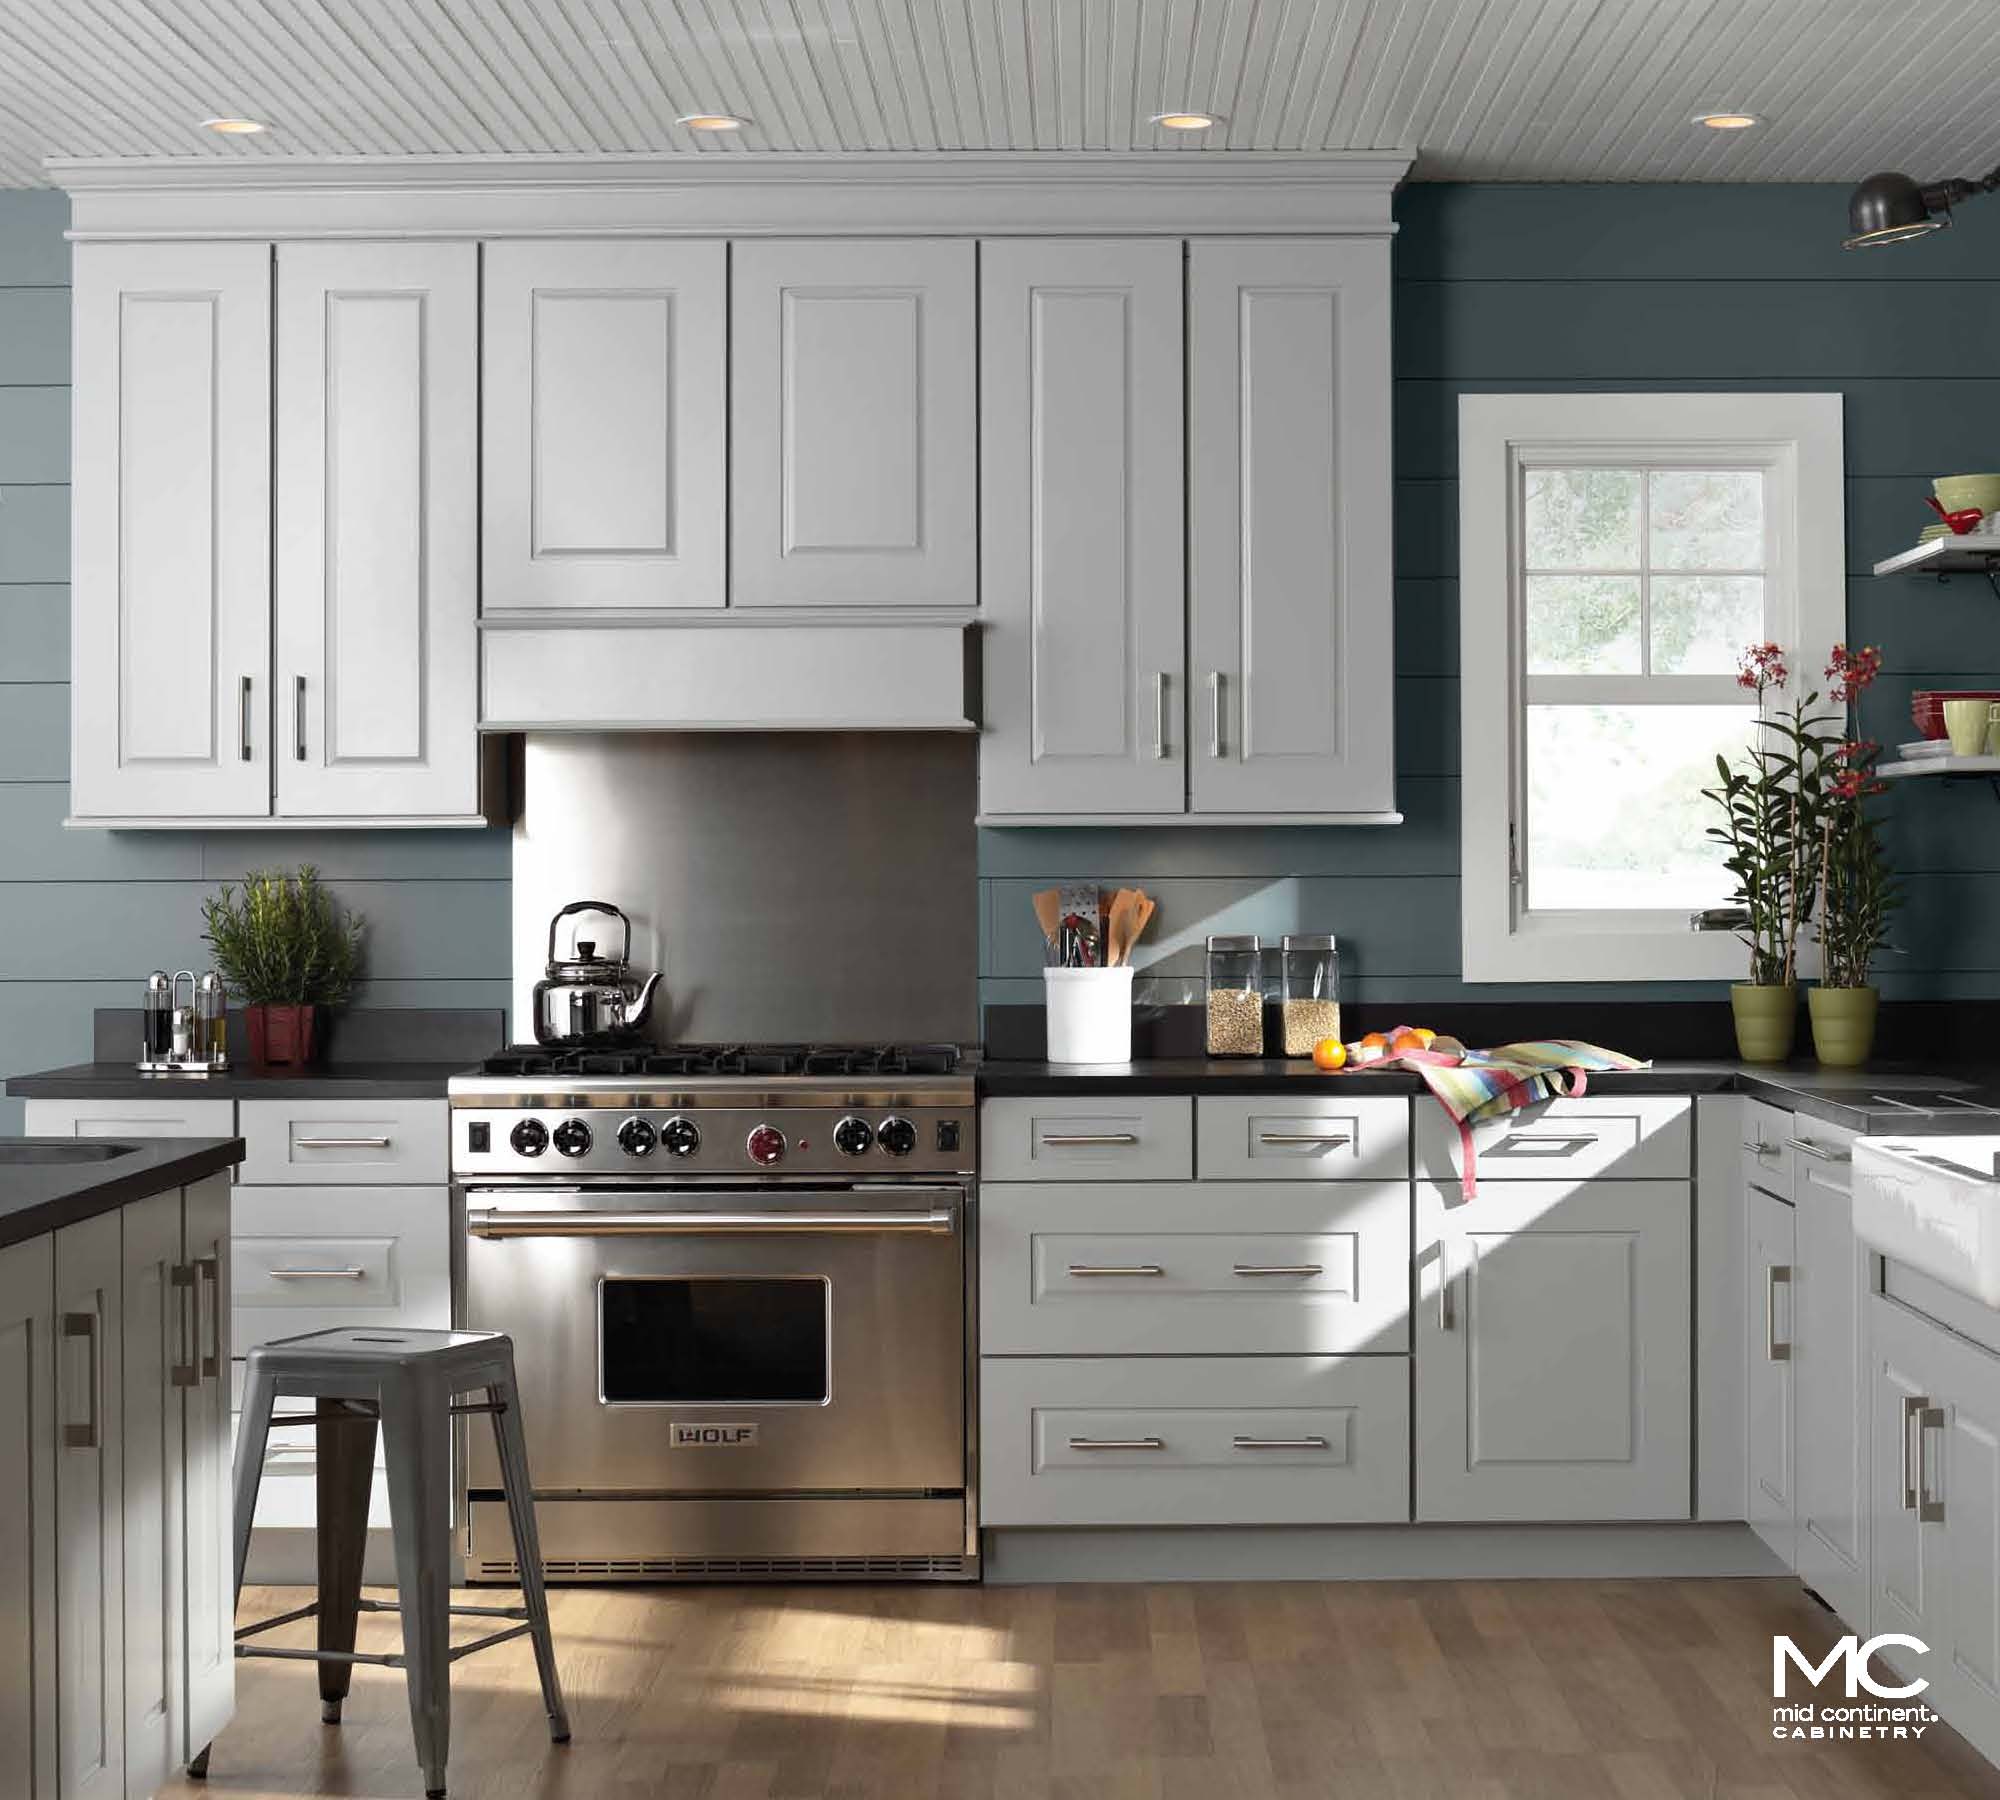 Mid Continent Cabinetry Mid Continent Cabinets At Bkc Kitchen And